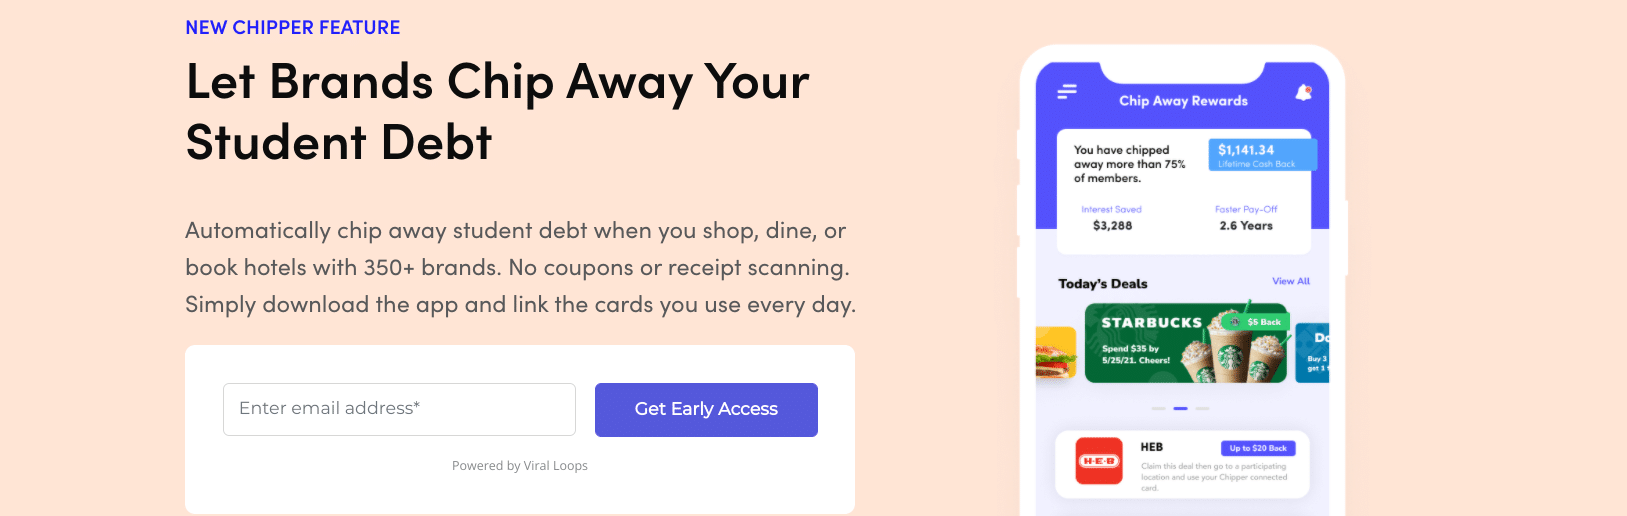 Chipper Review: Chip Away Rewards